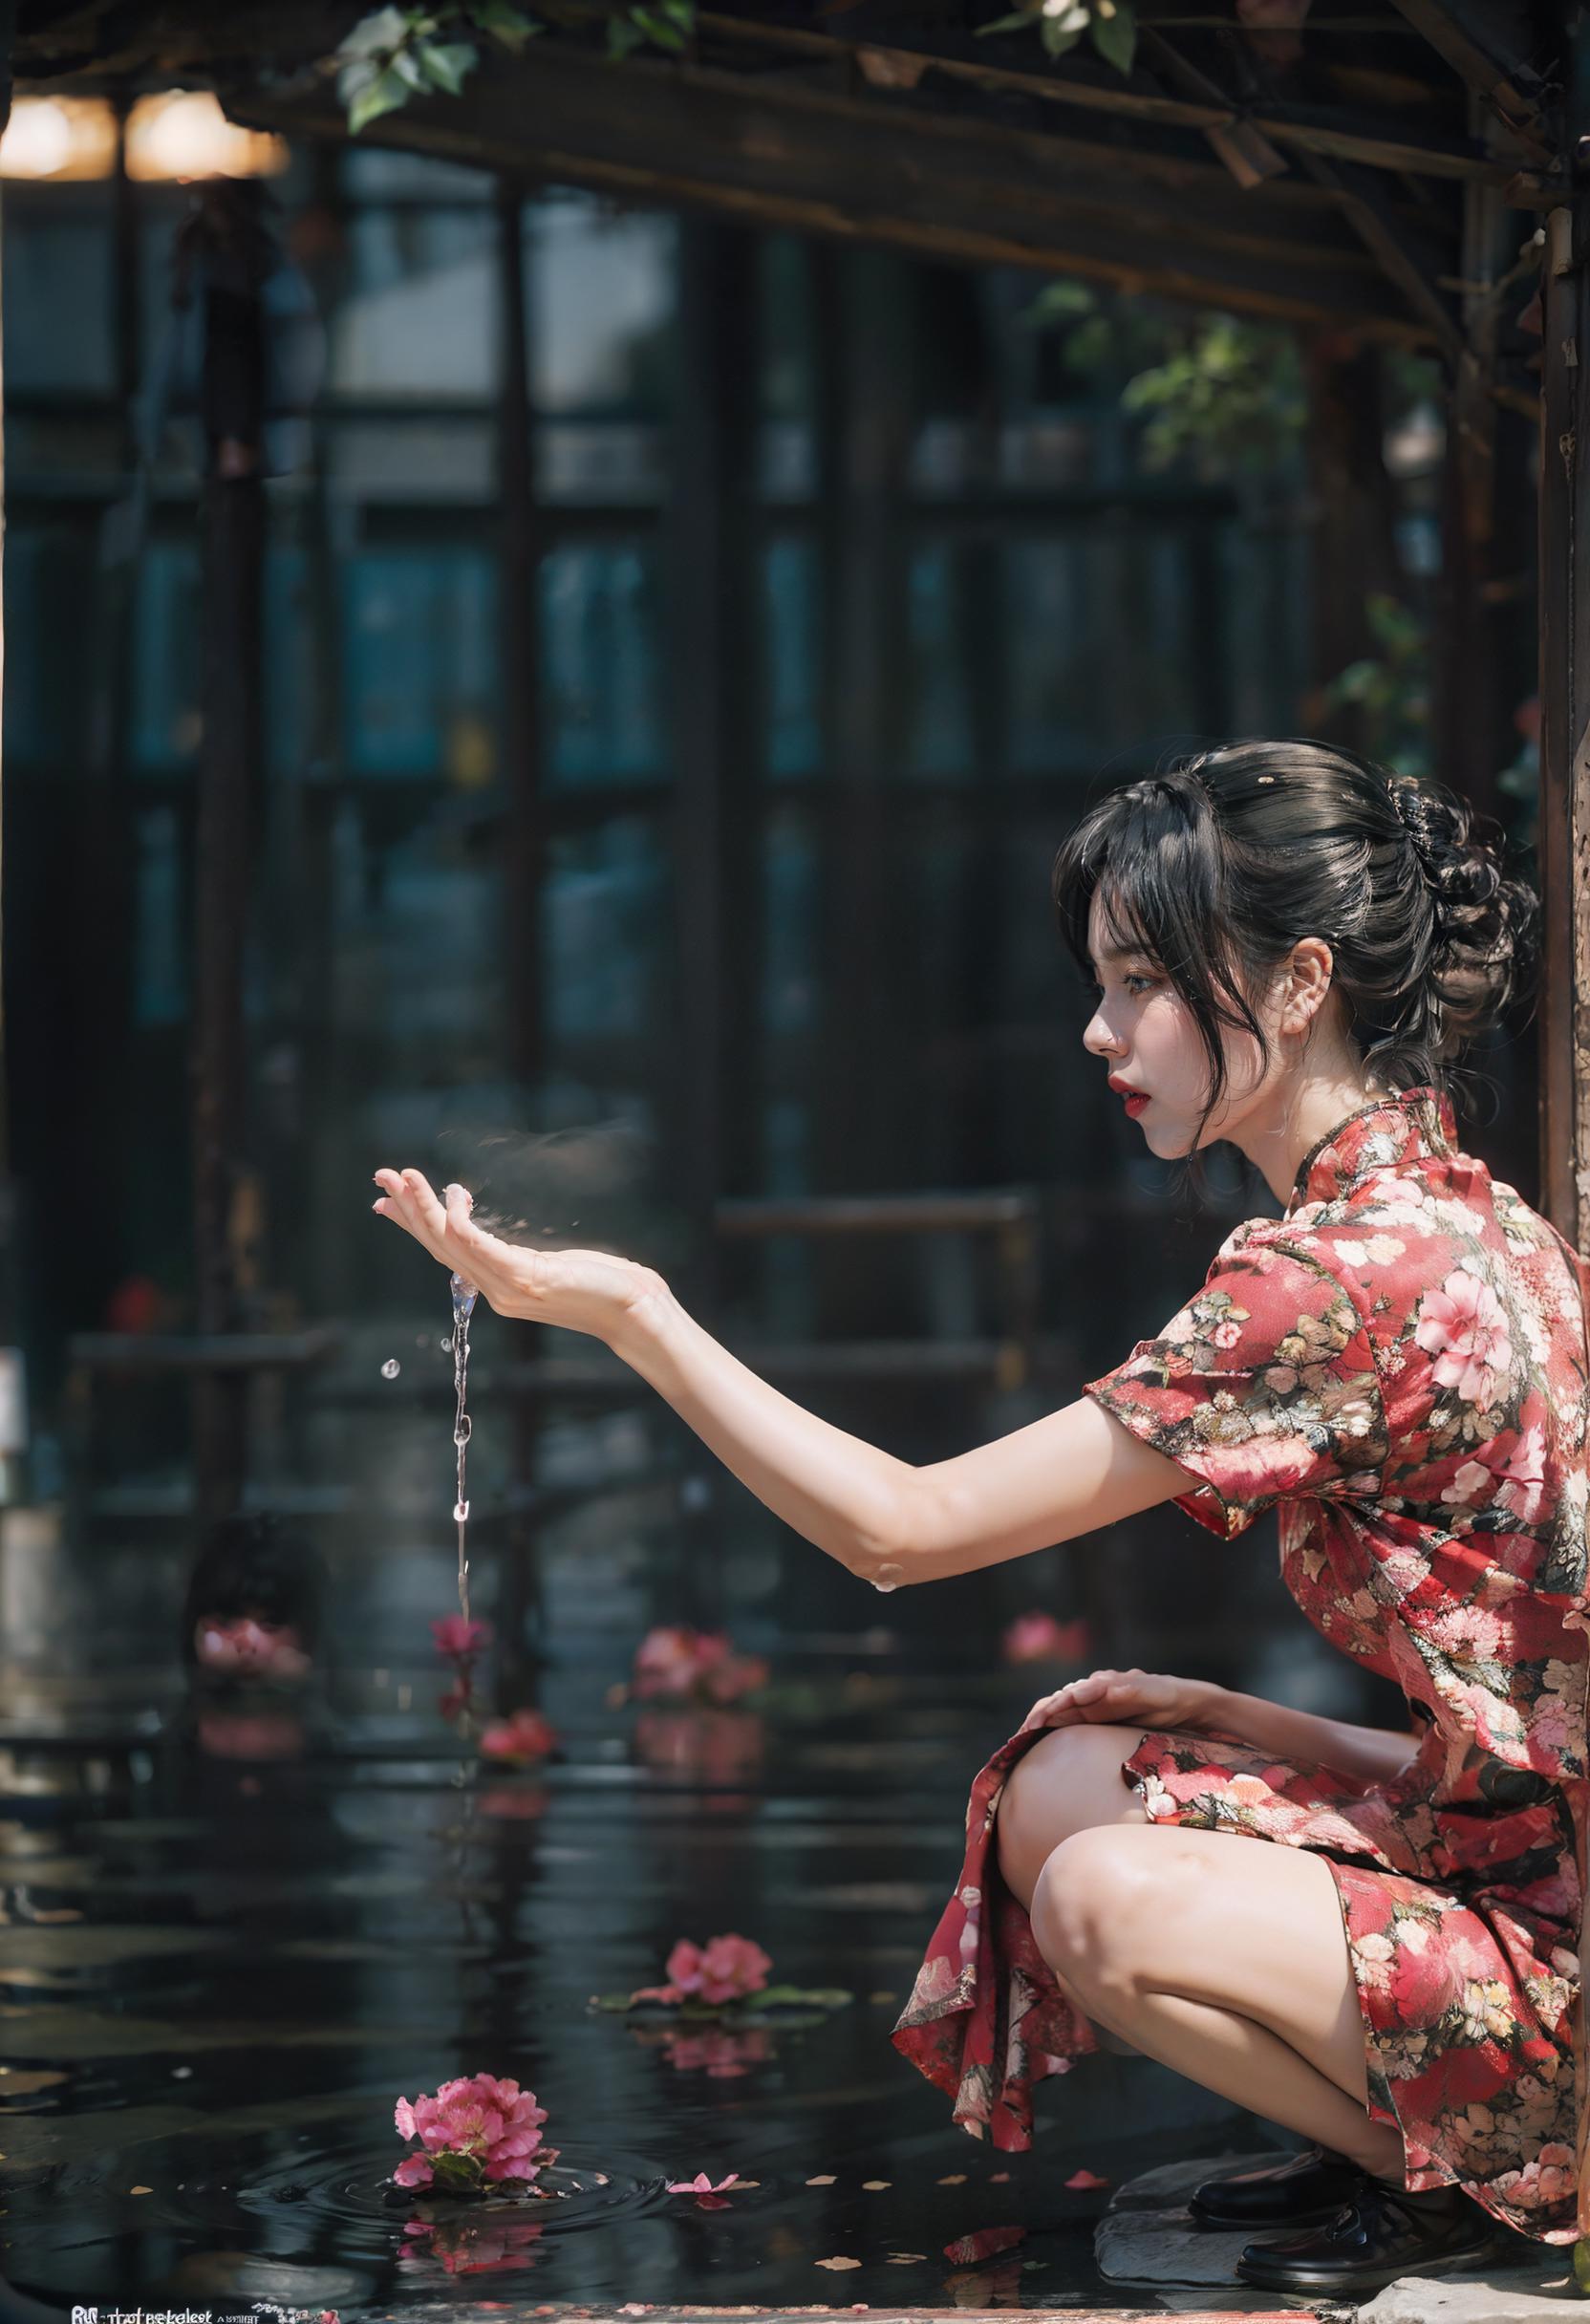 A woman in a red dress sitting at the edge of a body of water, with a flower petal falling from her hand.